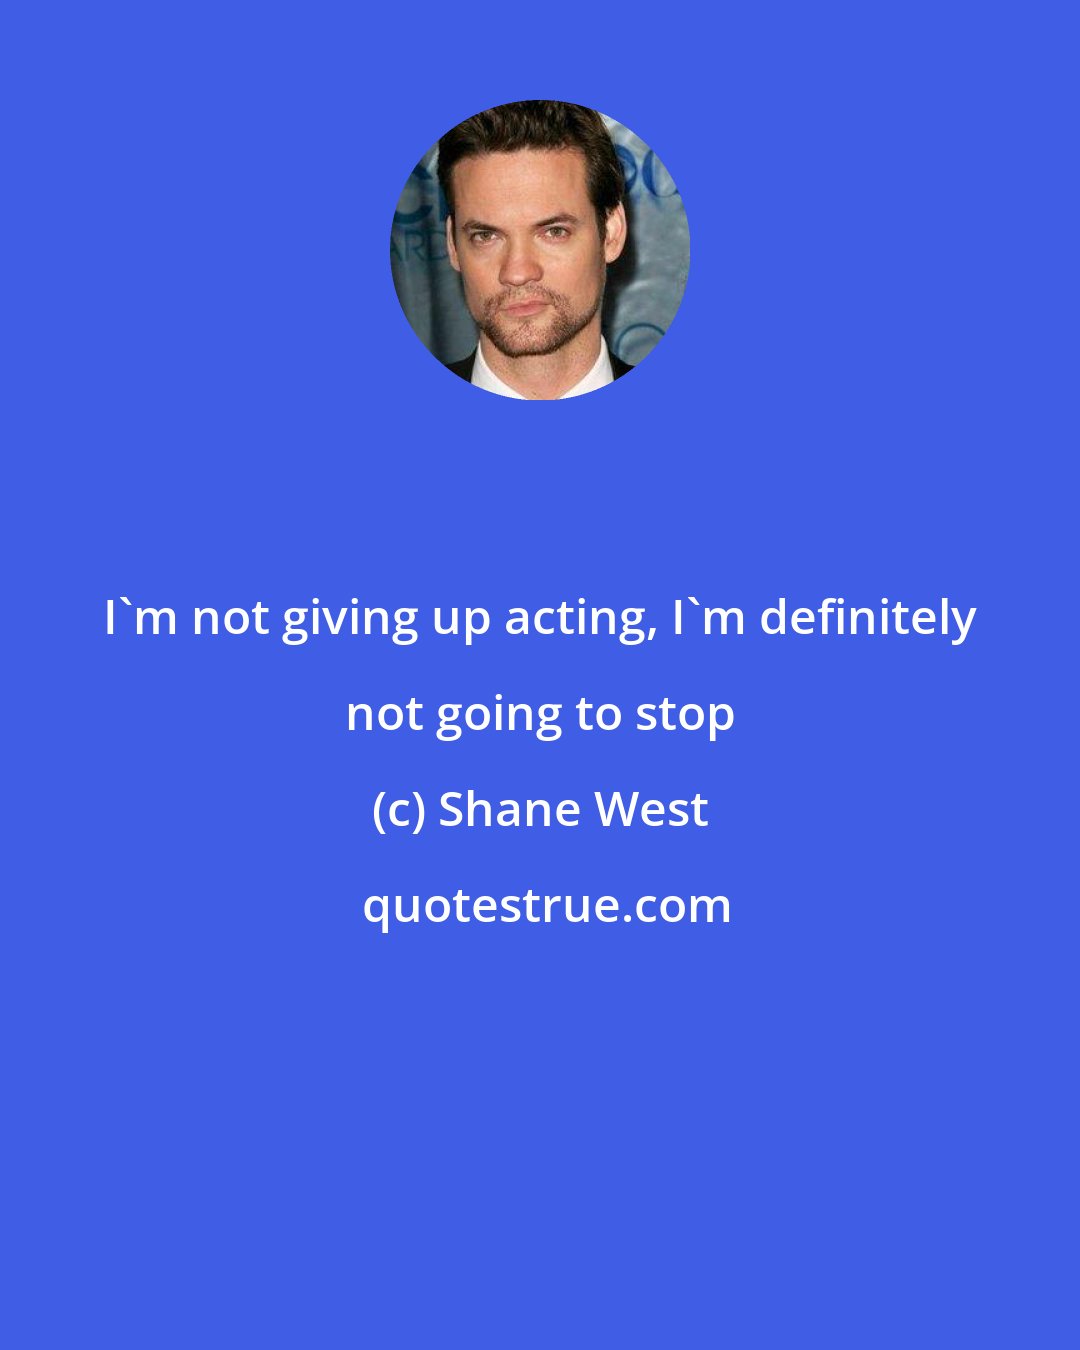 Shane West: I'm not giving up acting, I'm definitely not going to stop